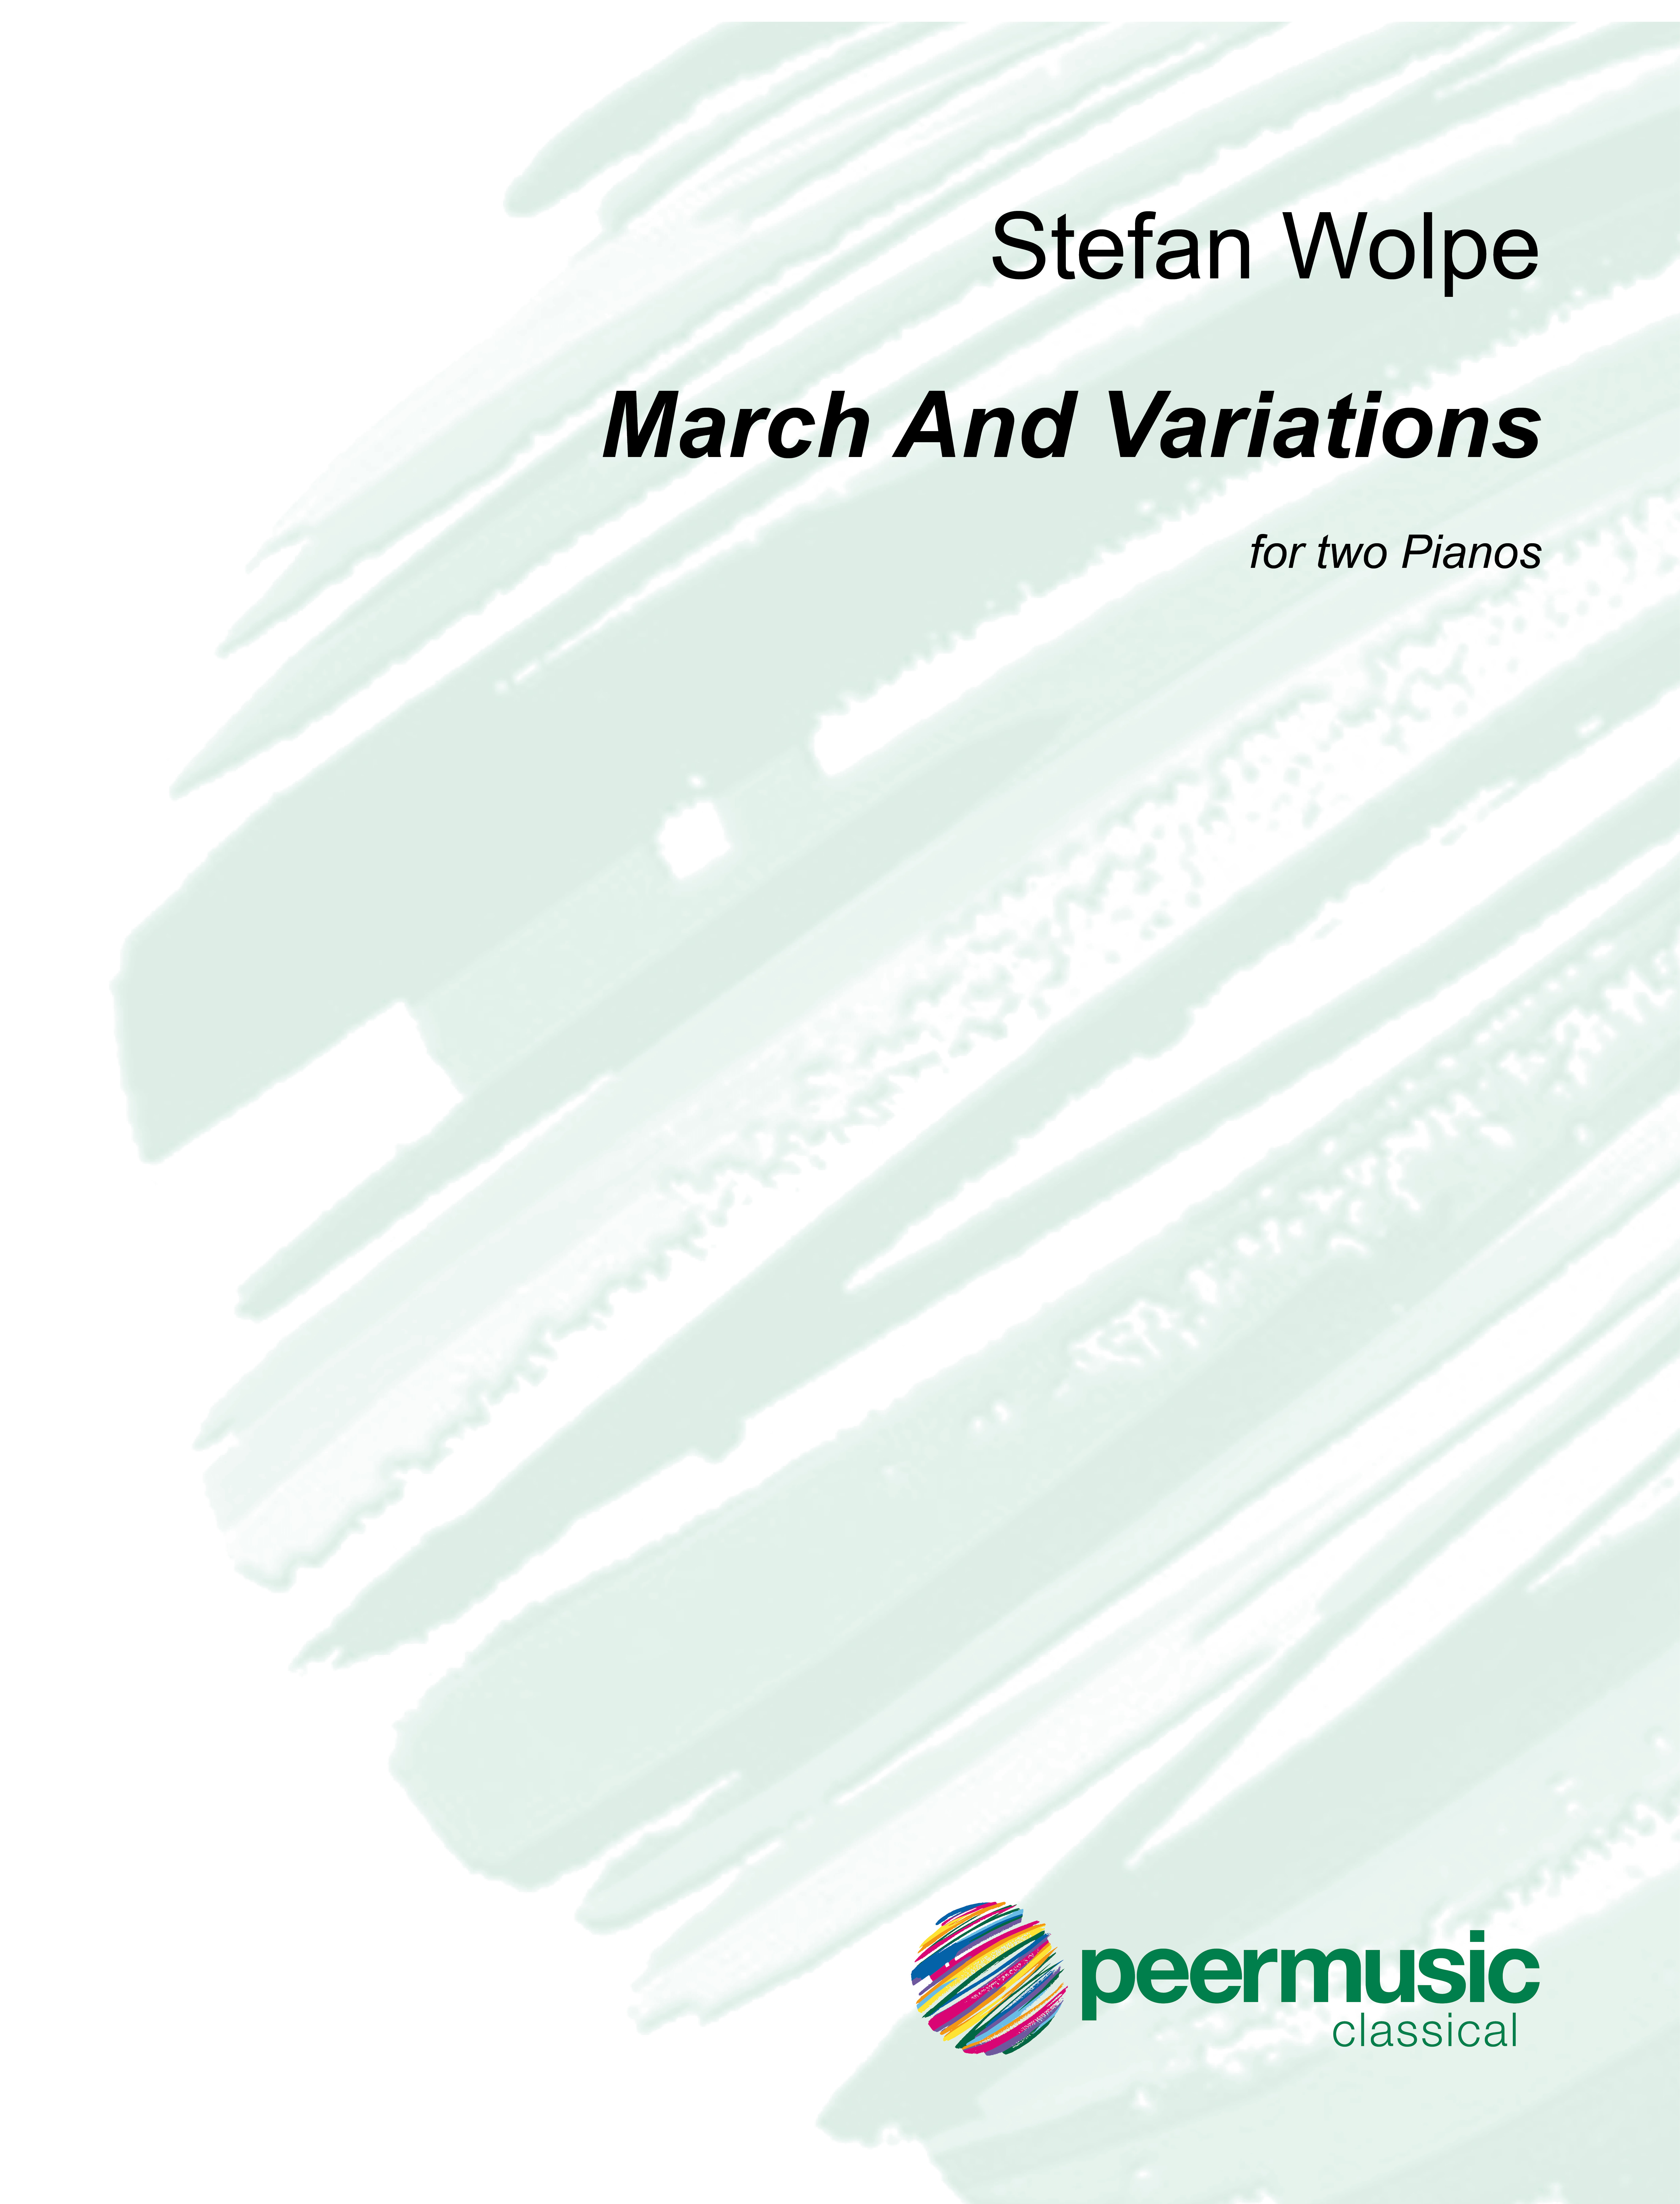 March and Variations